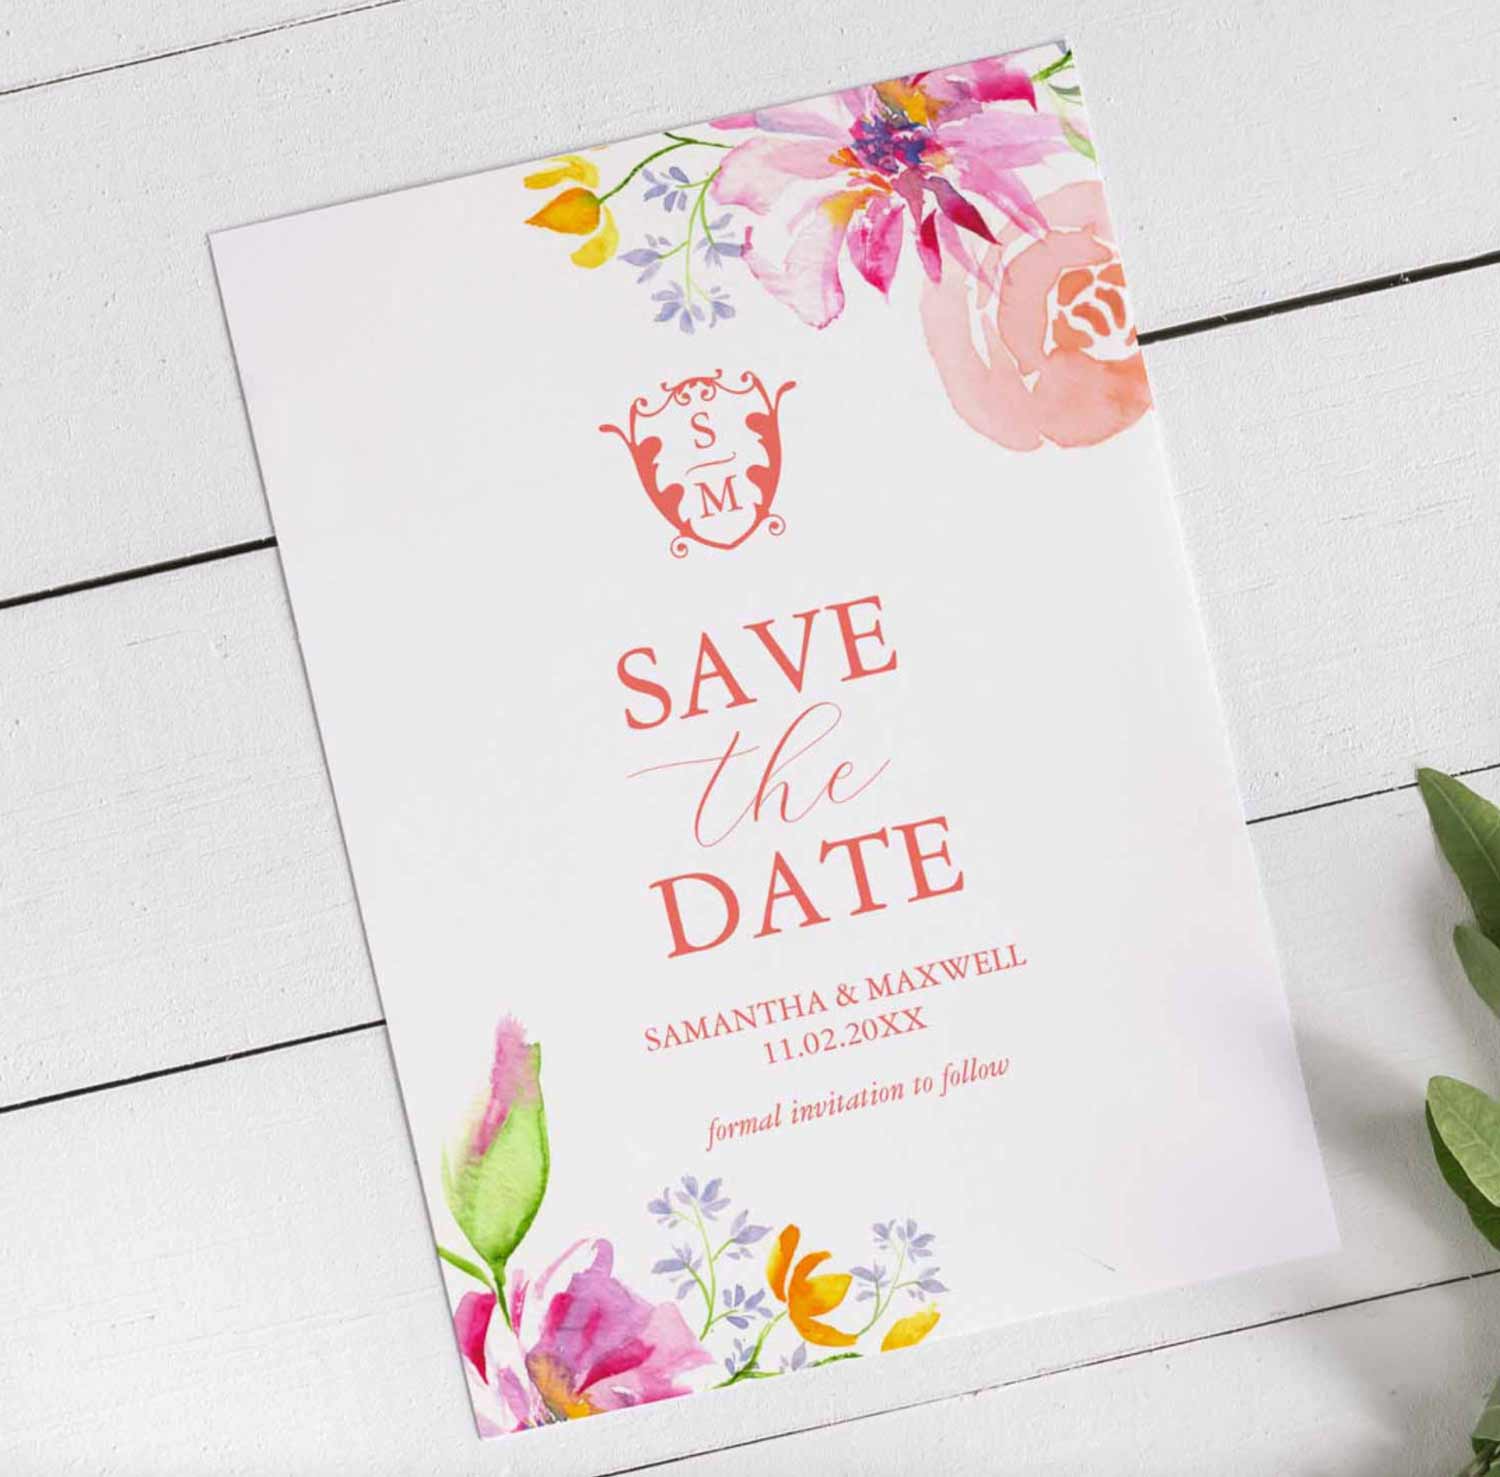 Pink and orange floral save the date invitation cards feature unique watercolor art and design by Victoria Grigaliunas. Perfect for weddings and bridal showers.